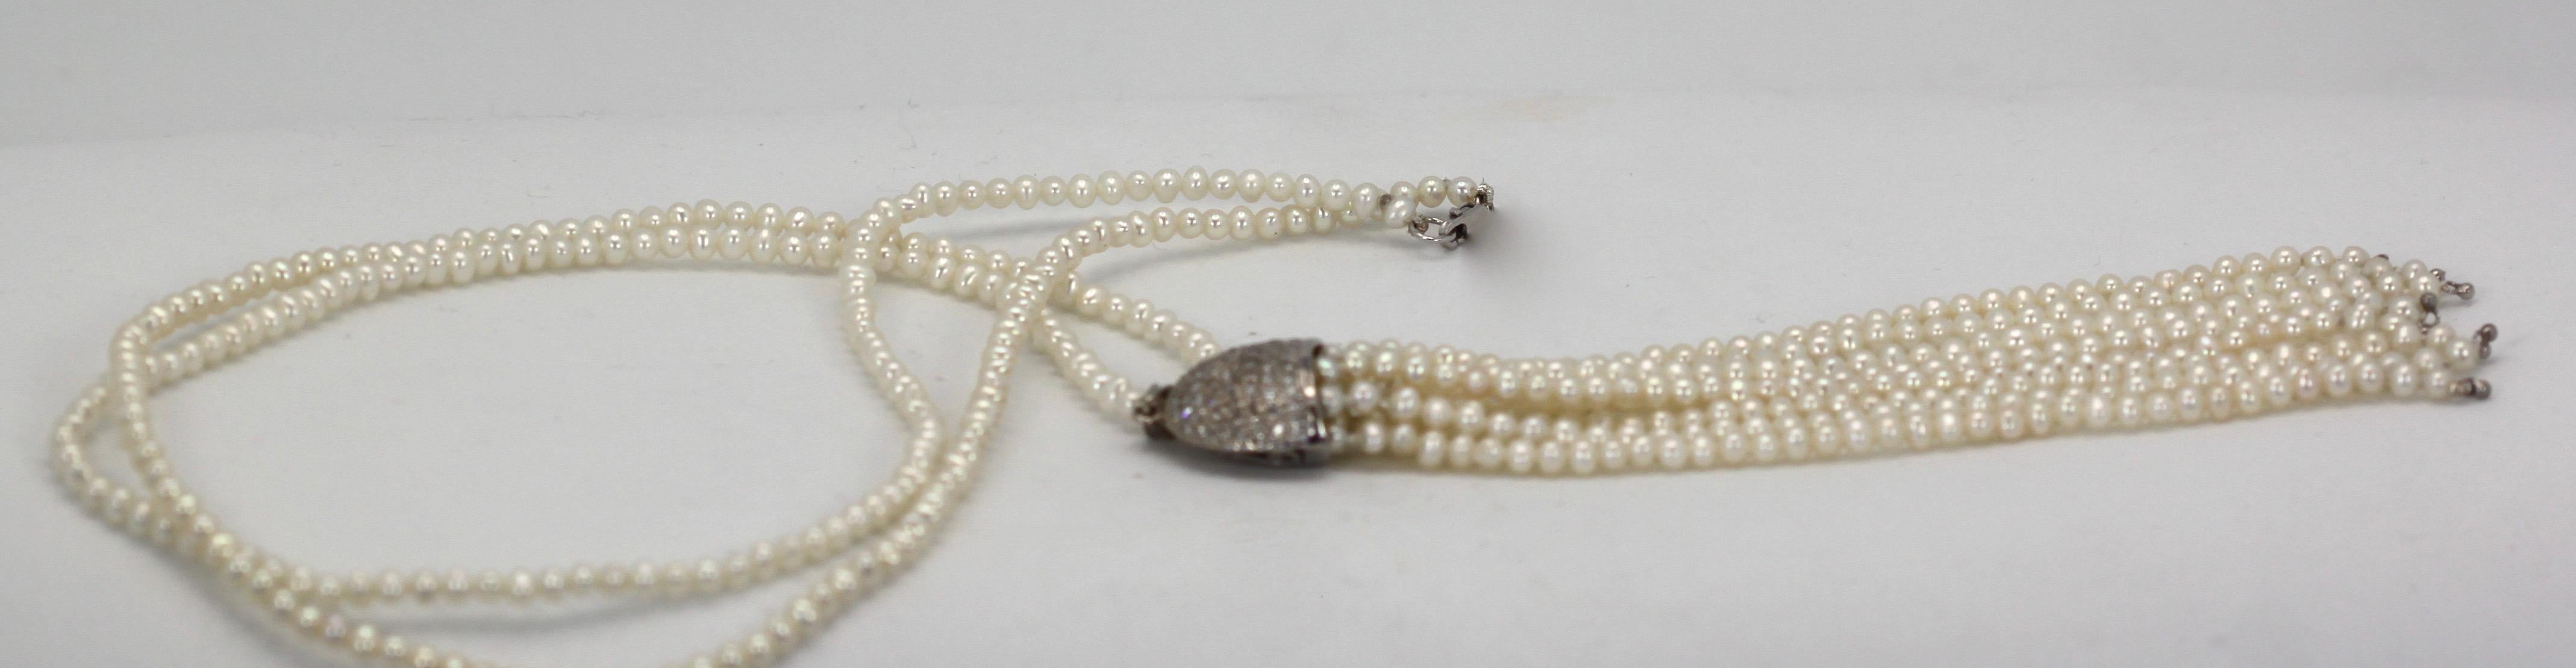 Women's Seed Pearl Necklace with 4 1/2